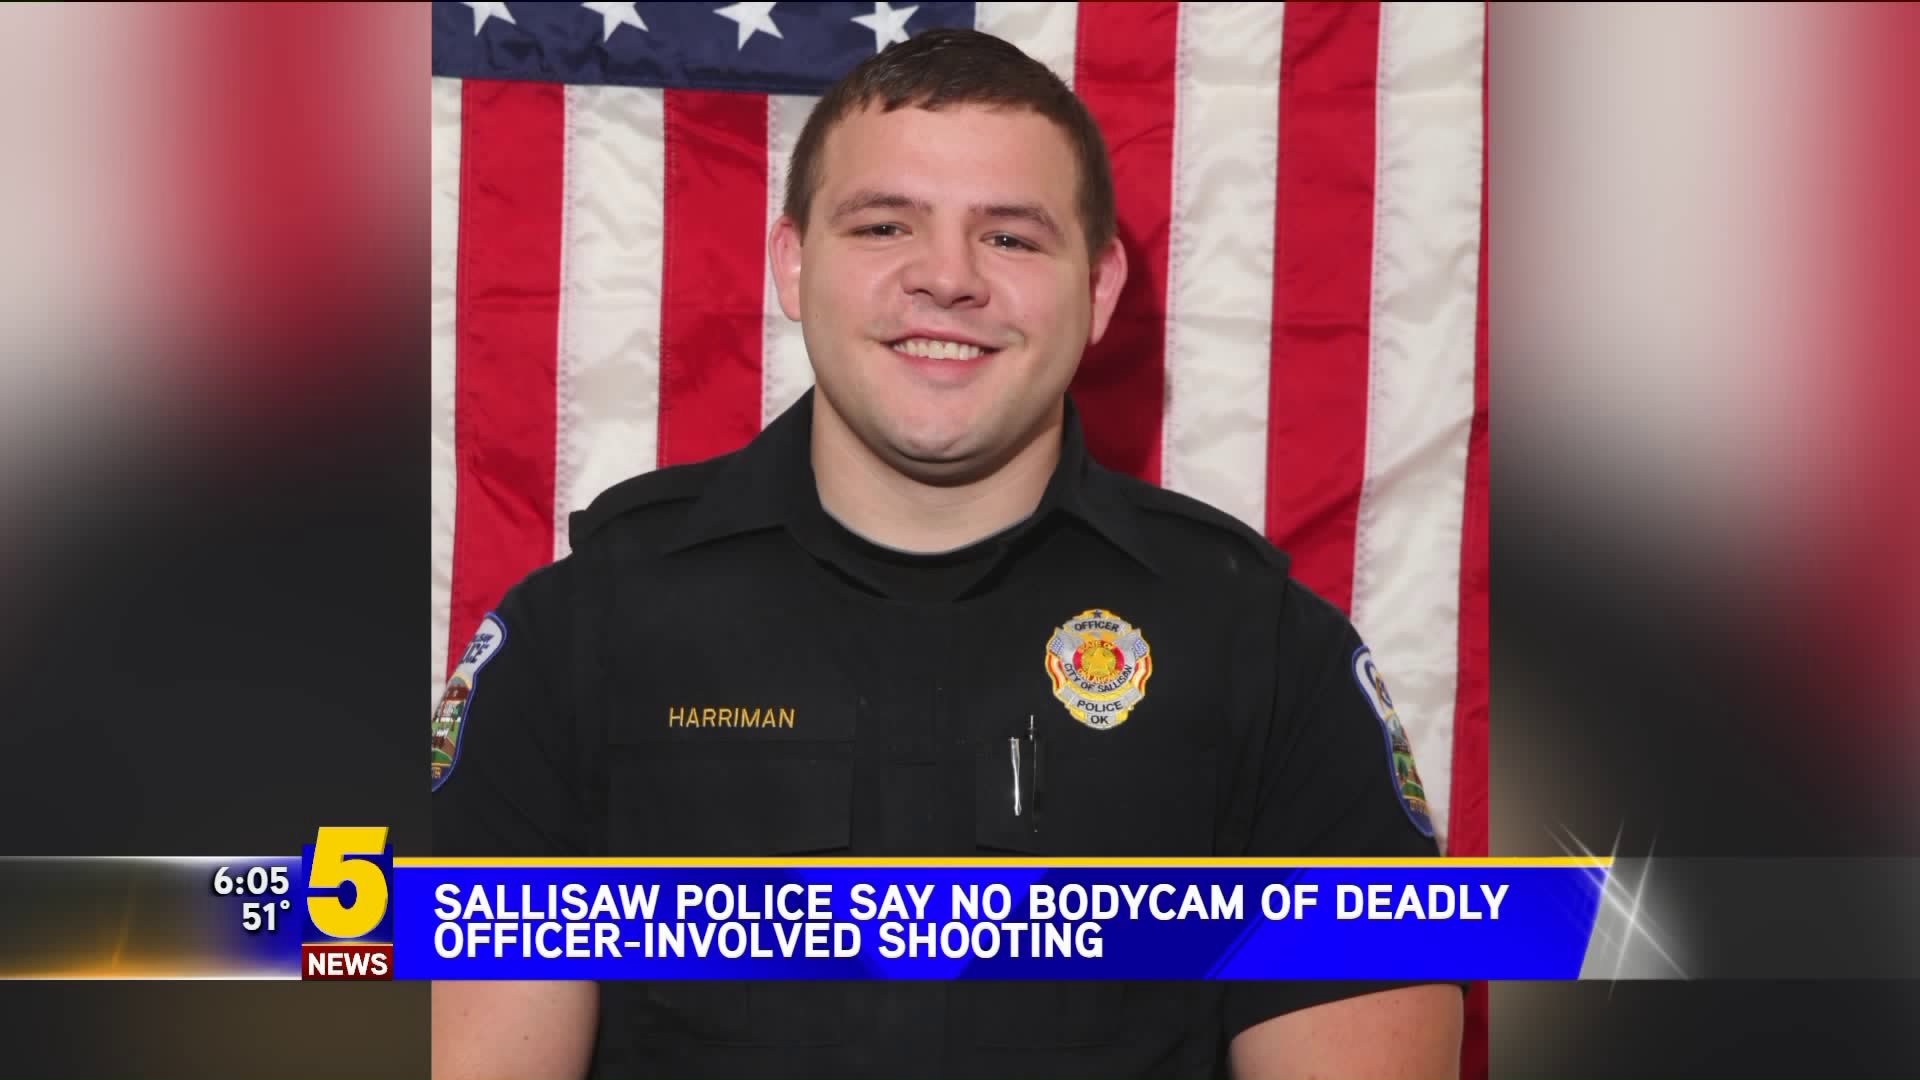 Sallisaw Police Say No Bodycam Footage Of Deadly Shooting